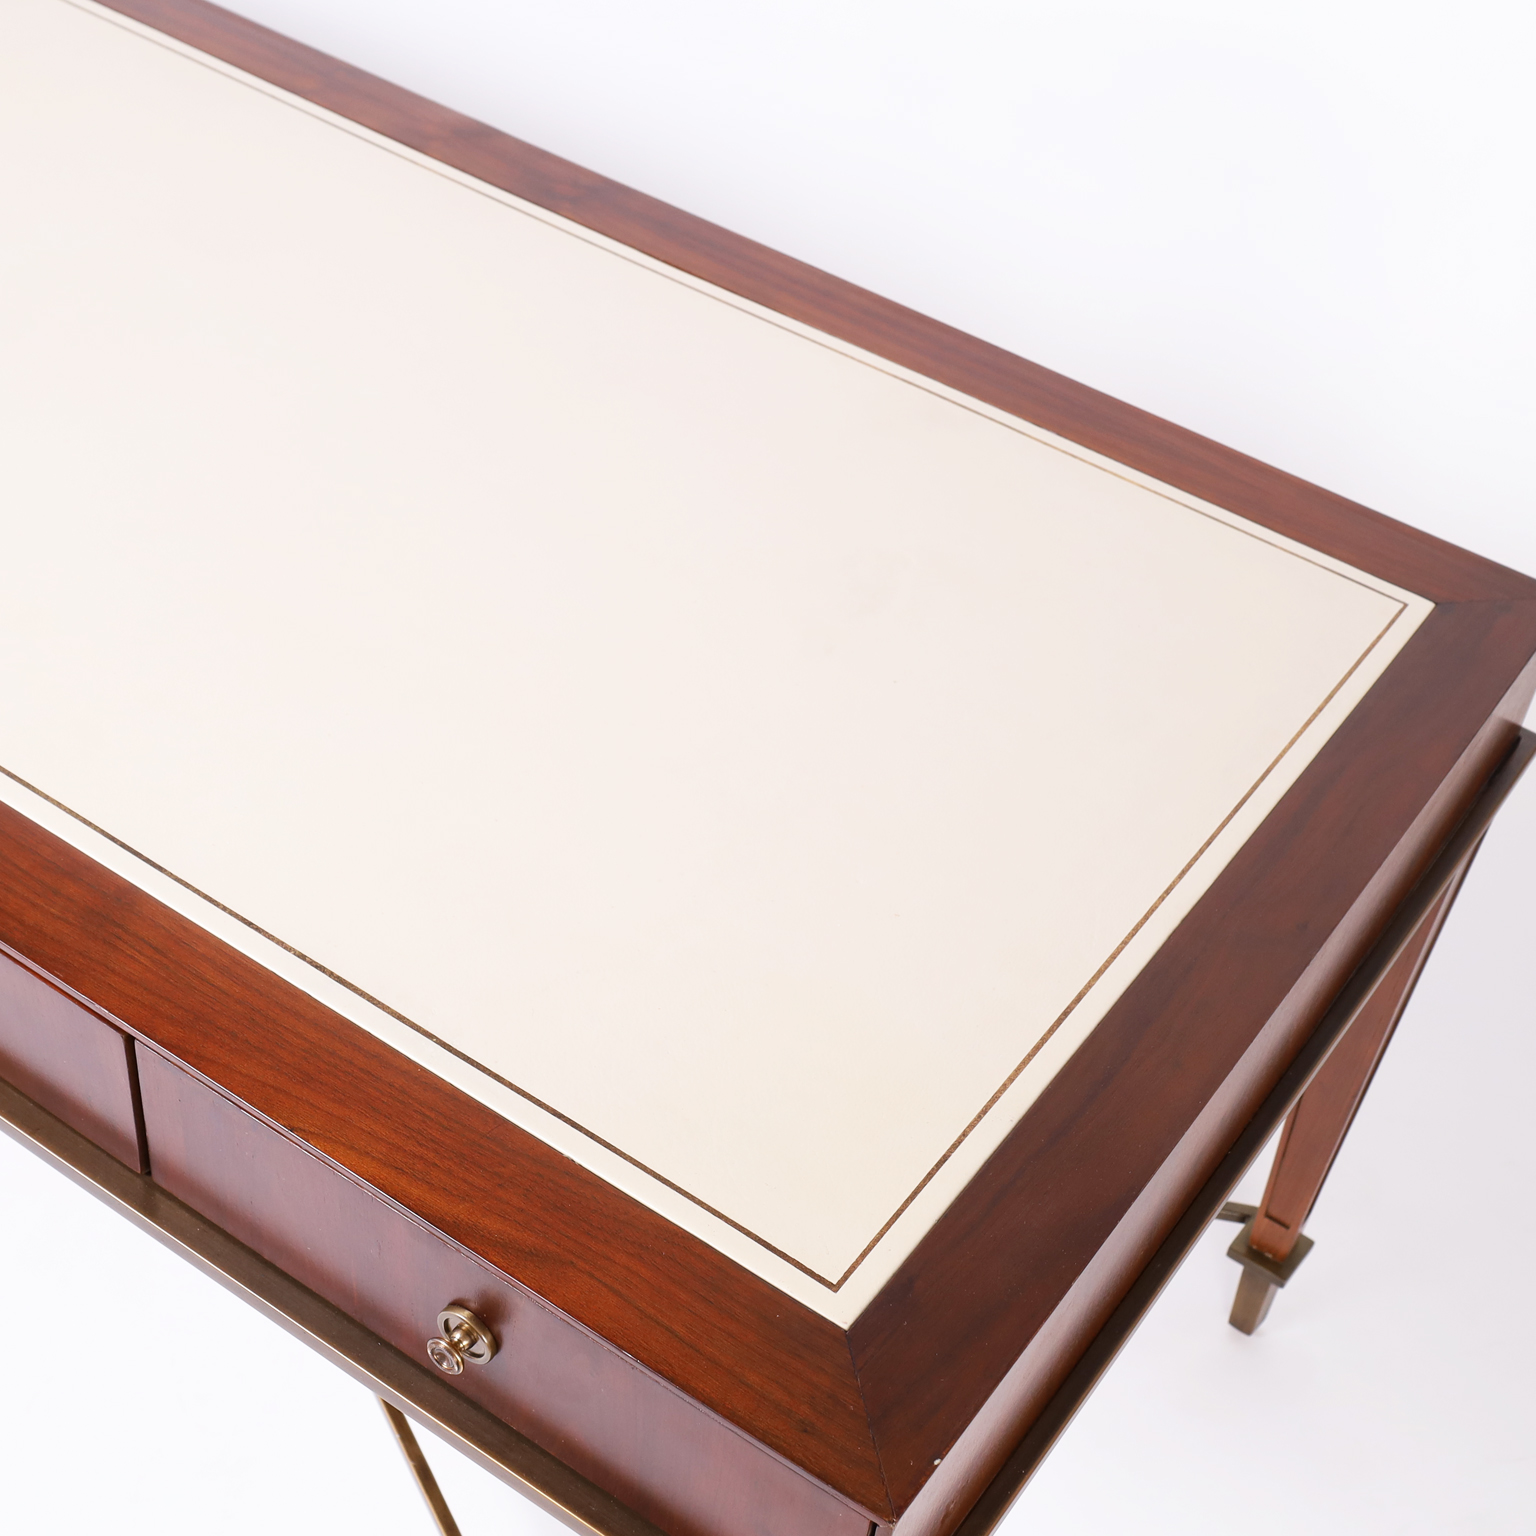 Art Deco Style Leather Top Desk by Global Views